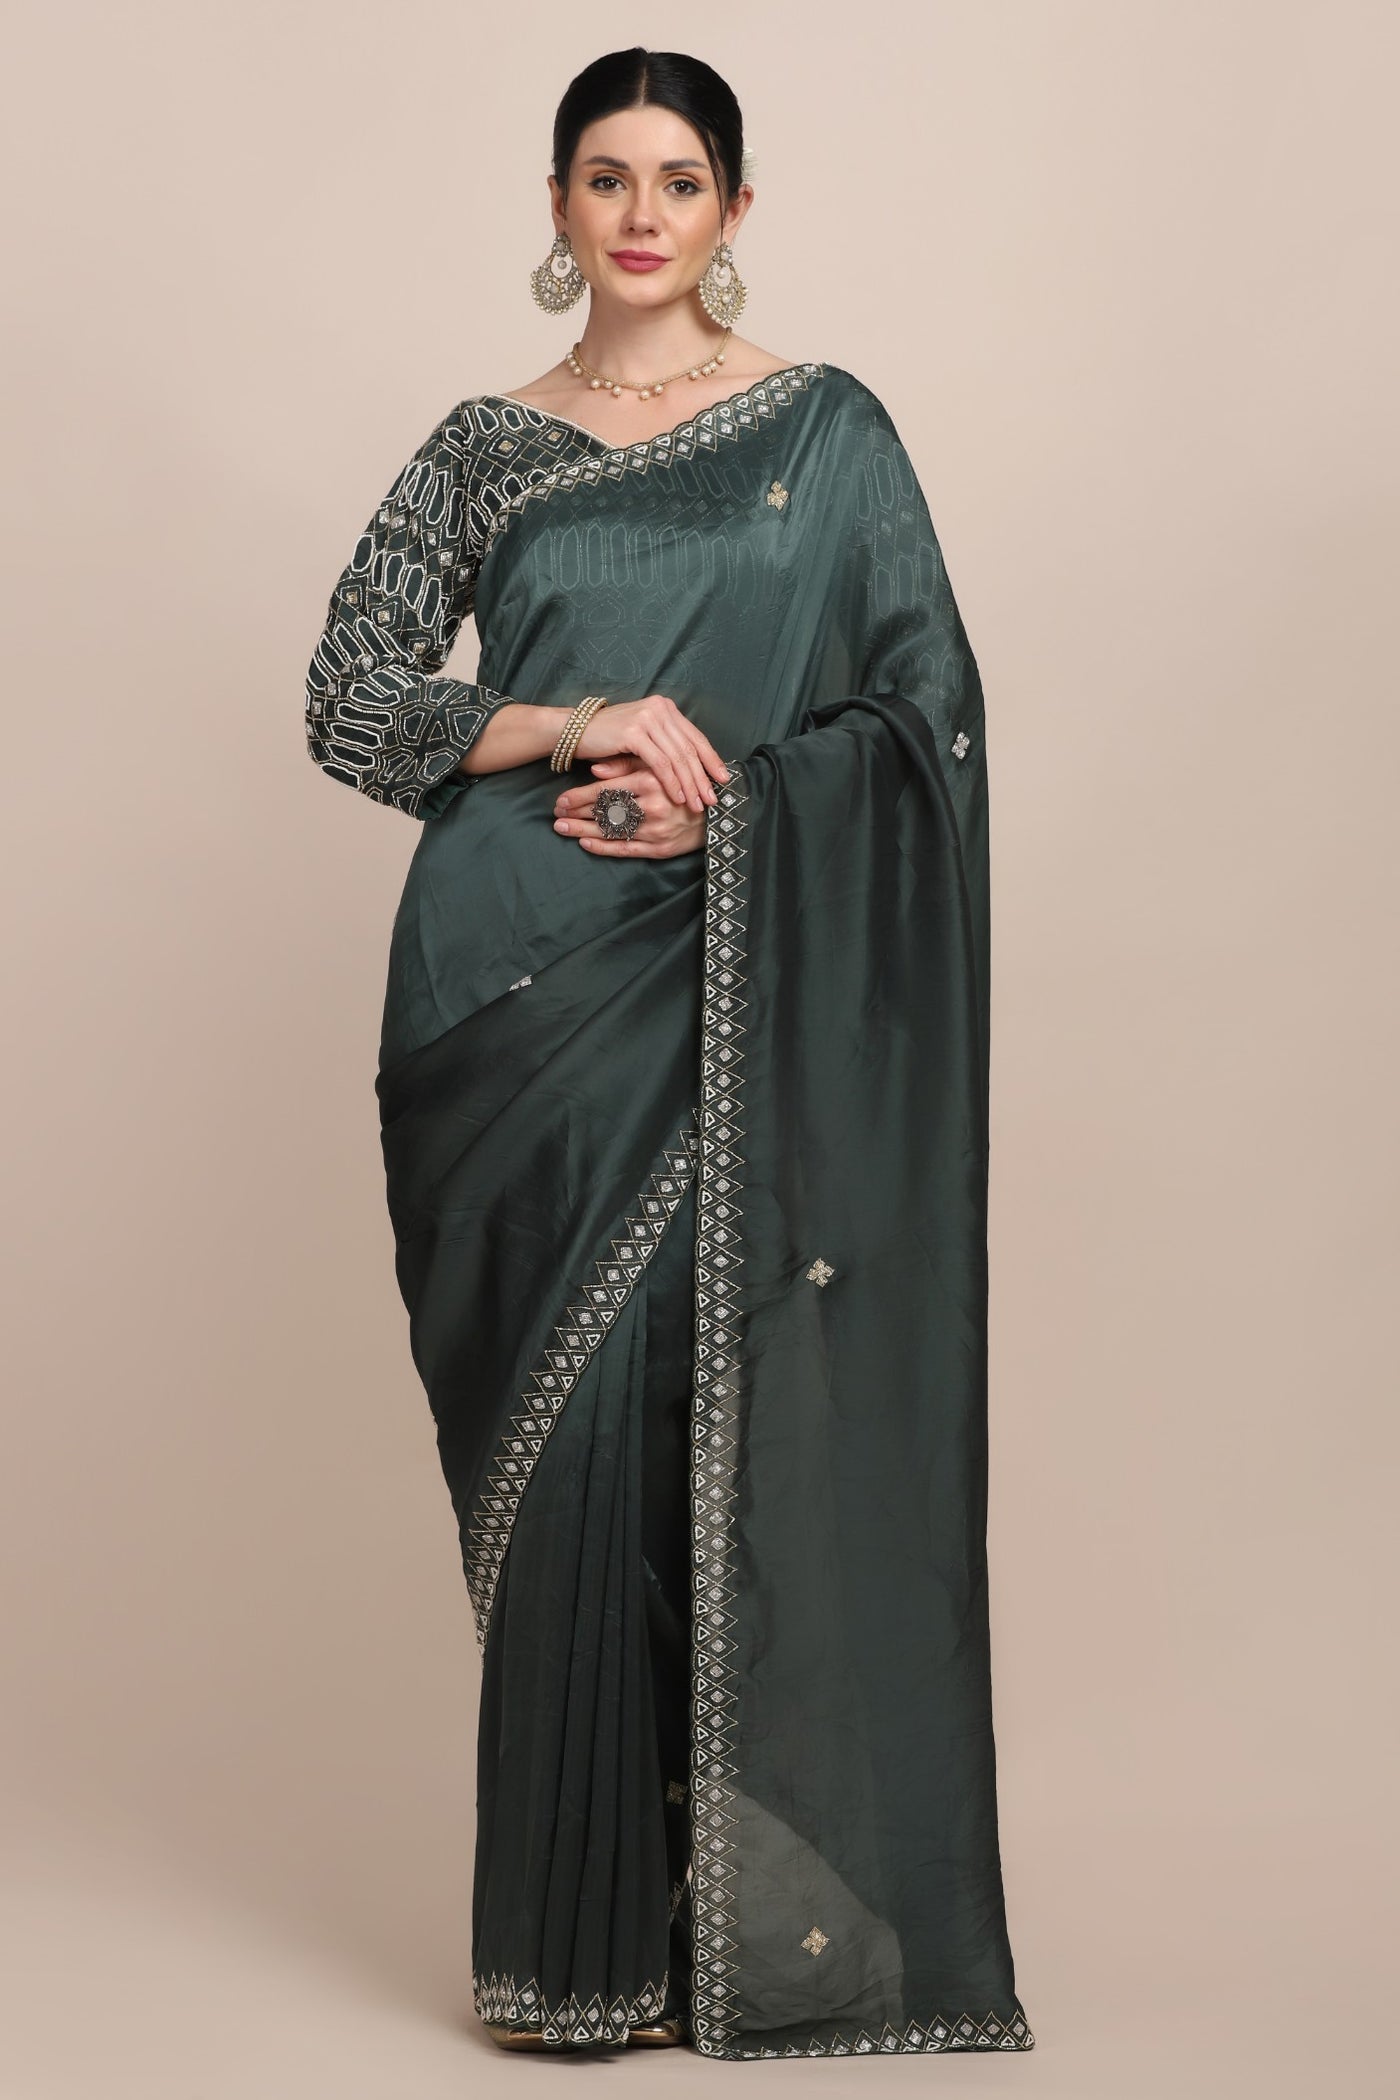 Beautiful green color floral motif embroidered saree